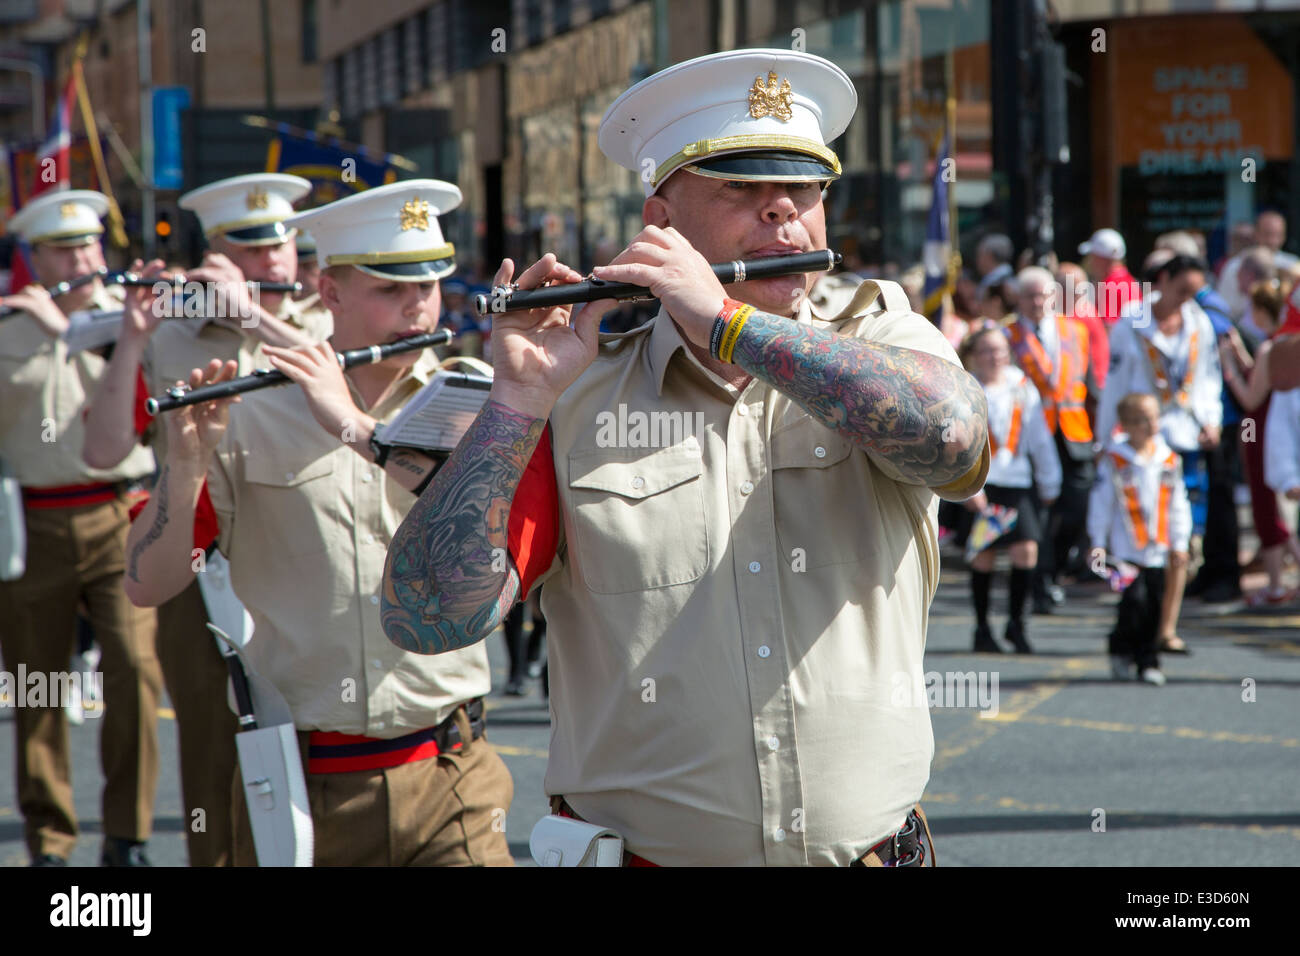 Man playing the flute, taking part in an Orange Walk parade through the streets of Glasgow, Scotland, UK Stock Photo